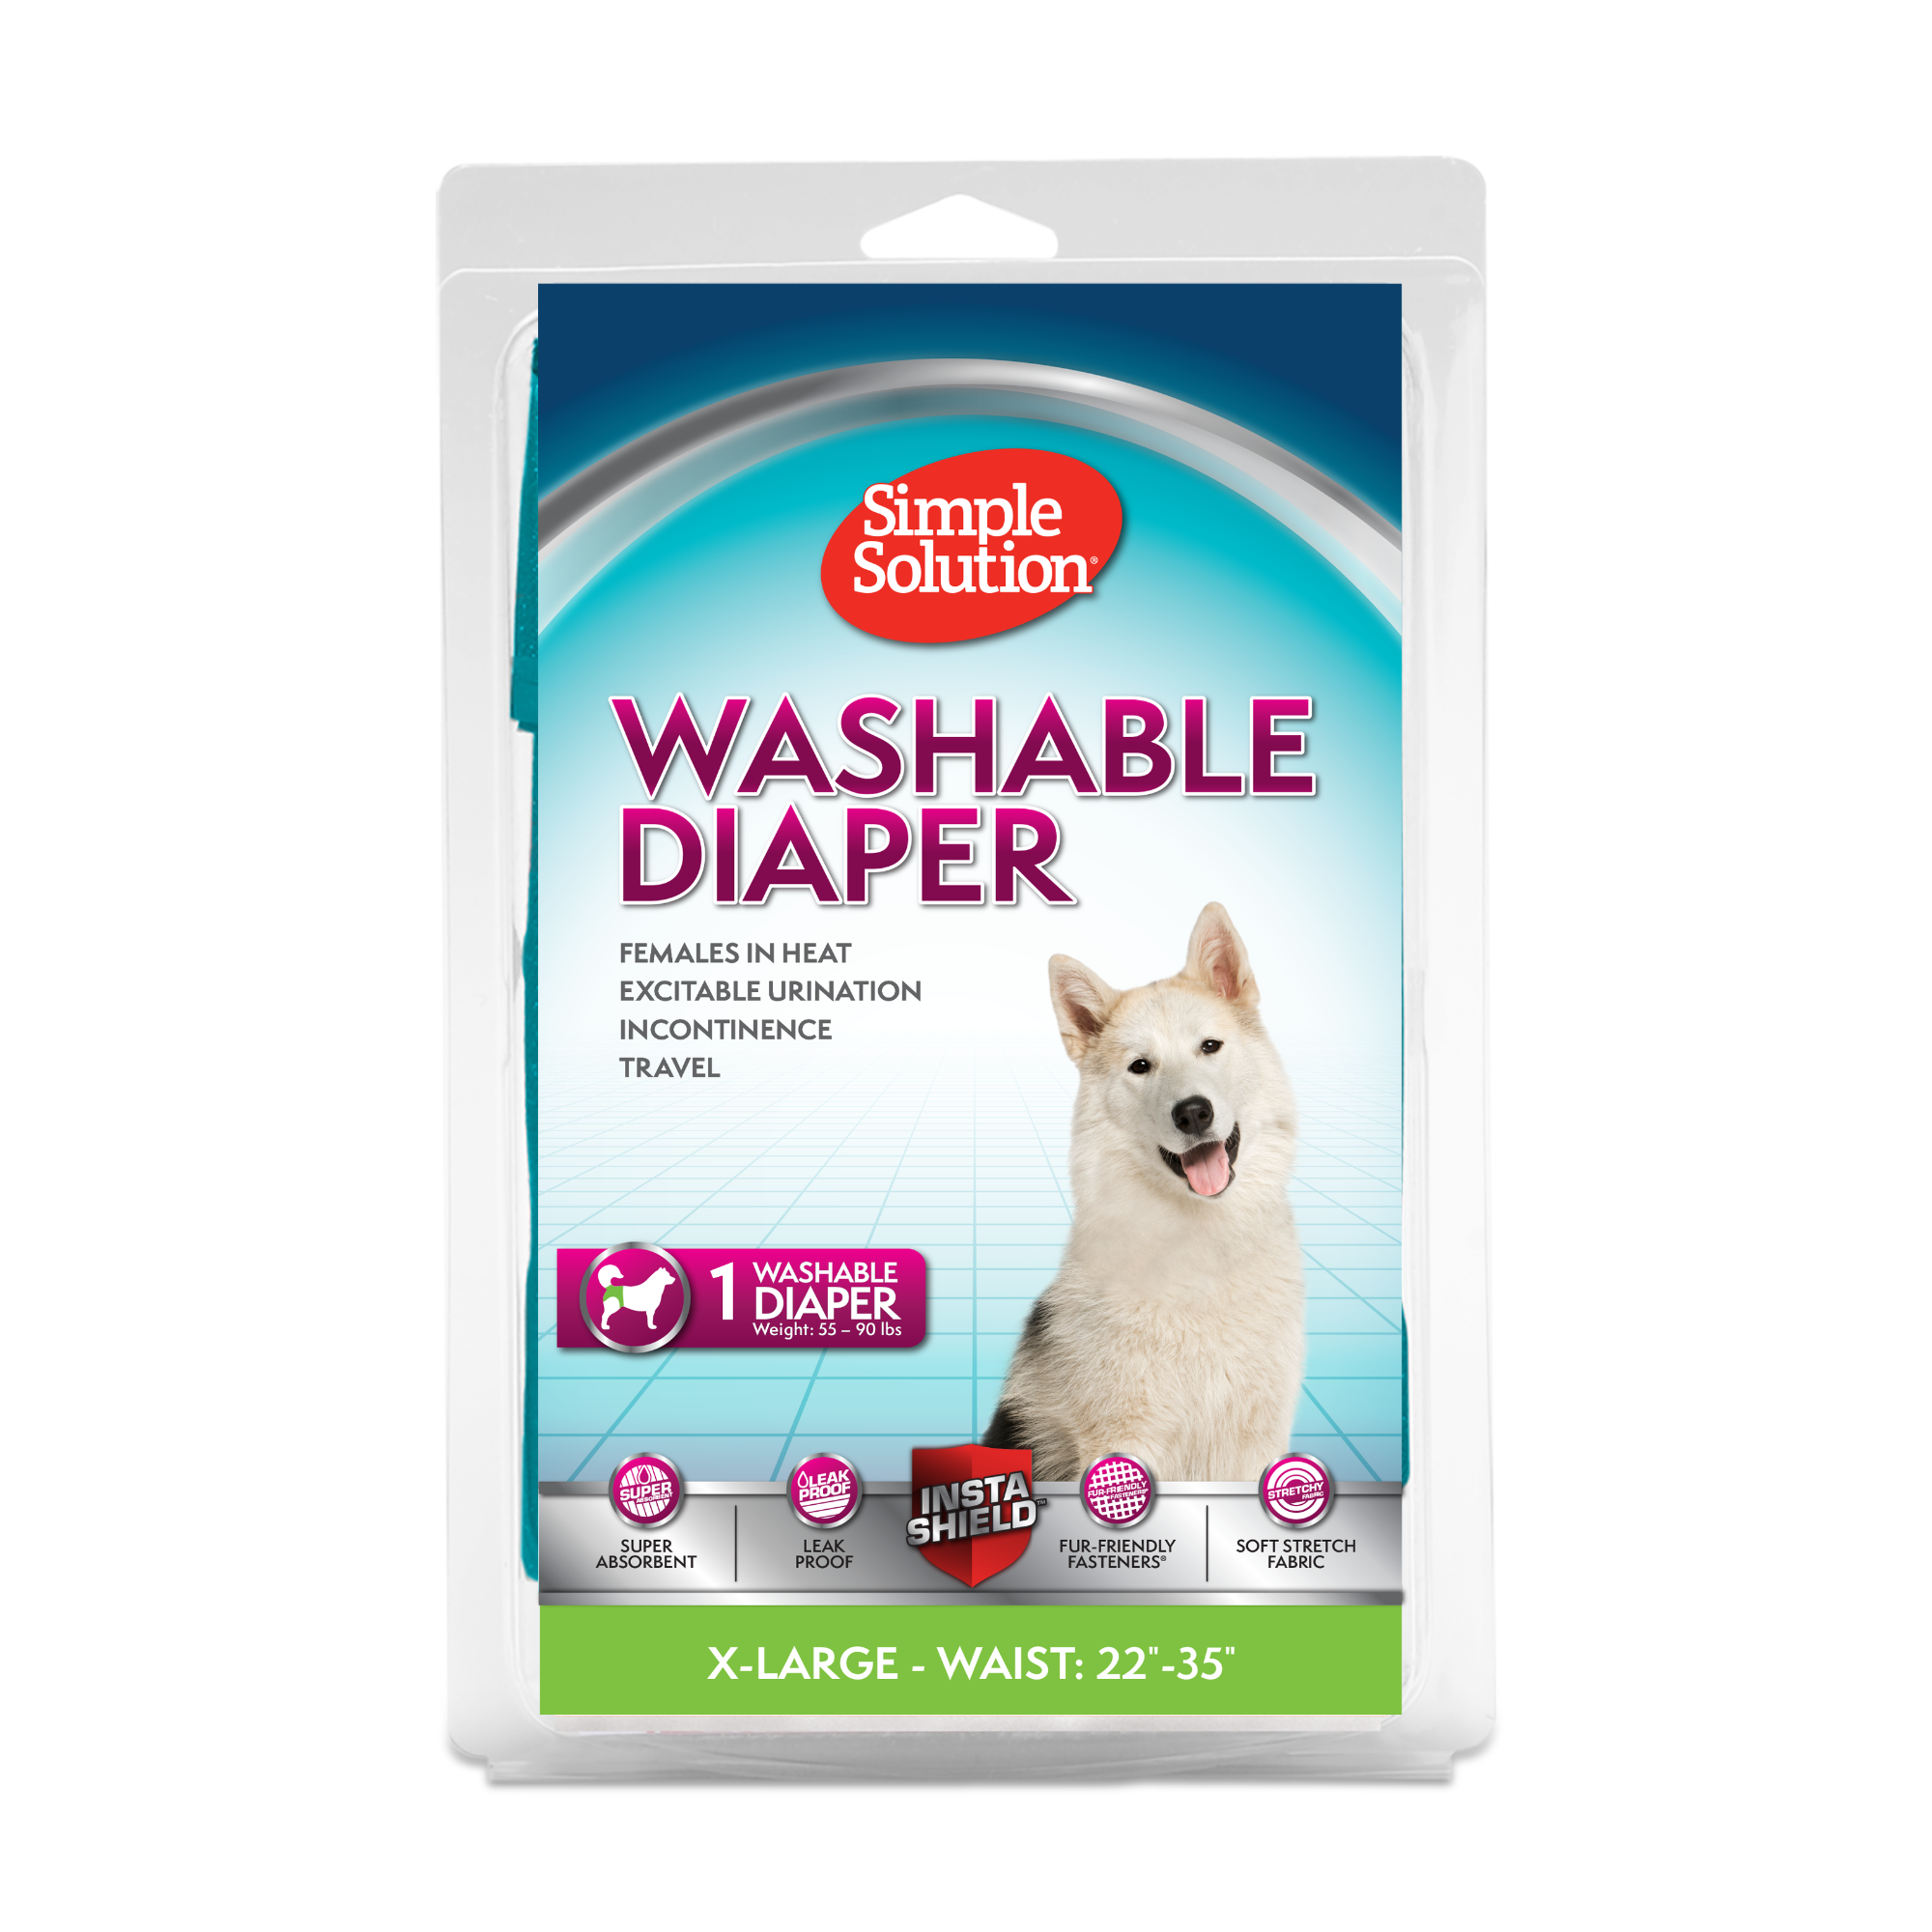 Females In Heat Incontinence Excitable Urination Super Absorbent Leak-Proof Fit Simple Solution Disposable Dog Diapers for Female Dogs or Puppy Training 